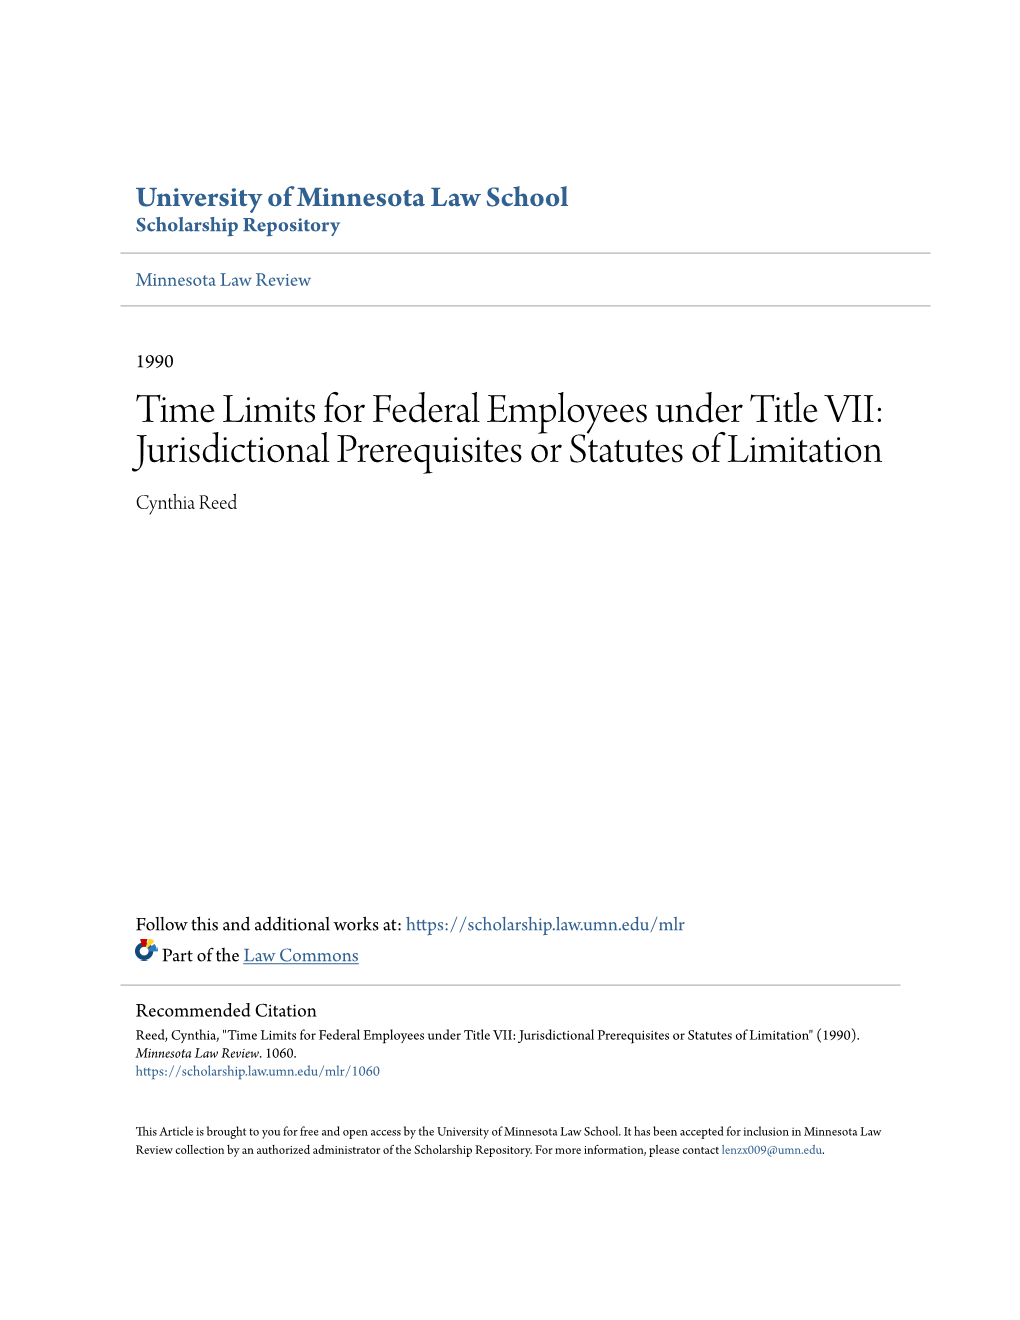 Time Limits for Federal Employees Under Title VII: Jurisdictional Prerequisites Or Statutes of Limitation Cynthia Reed